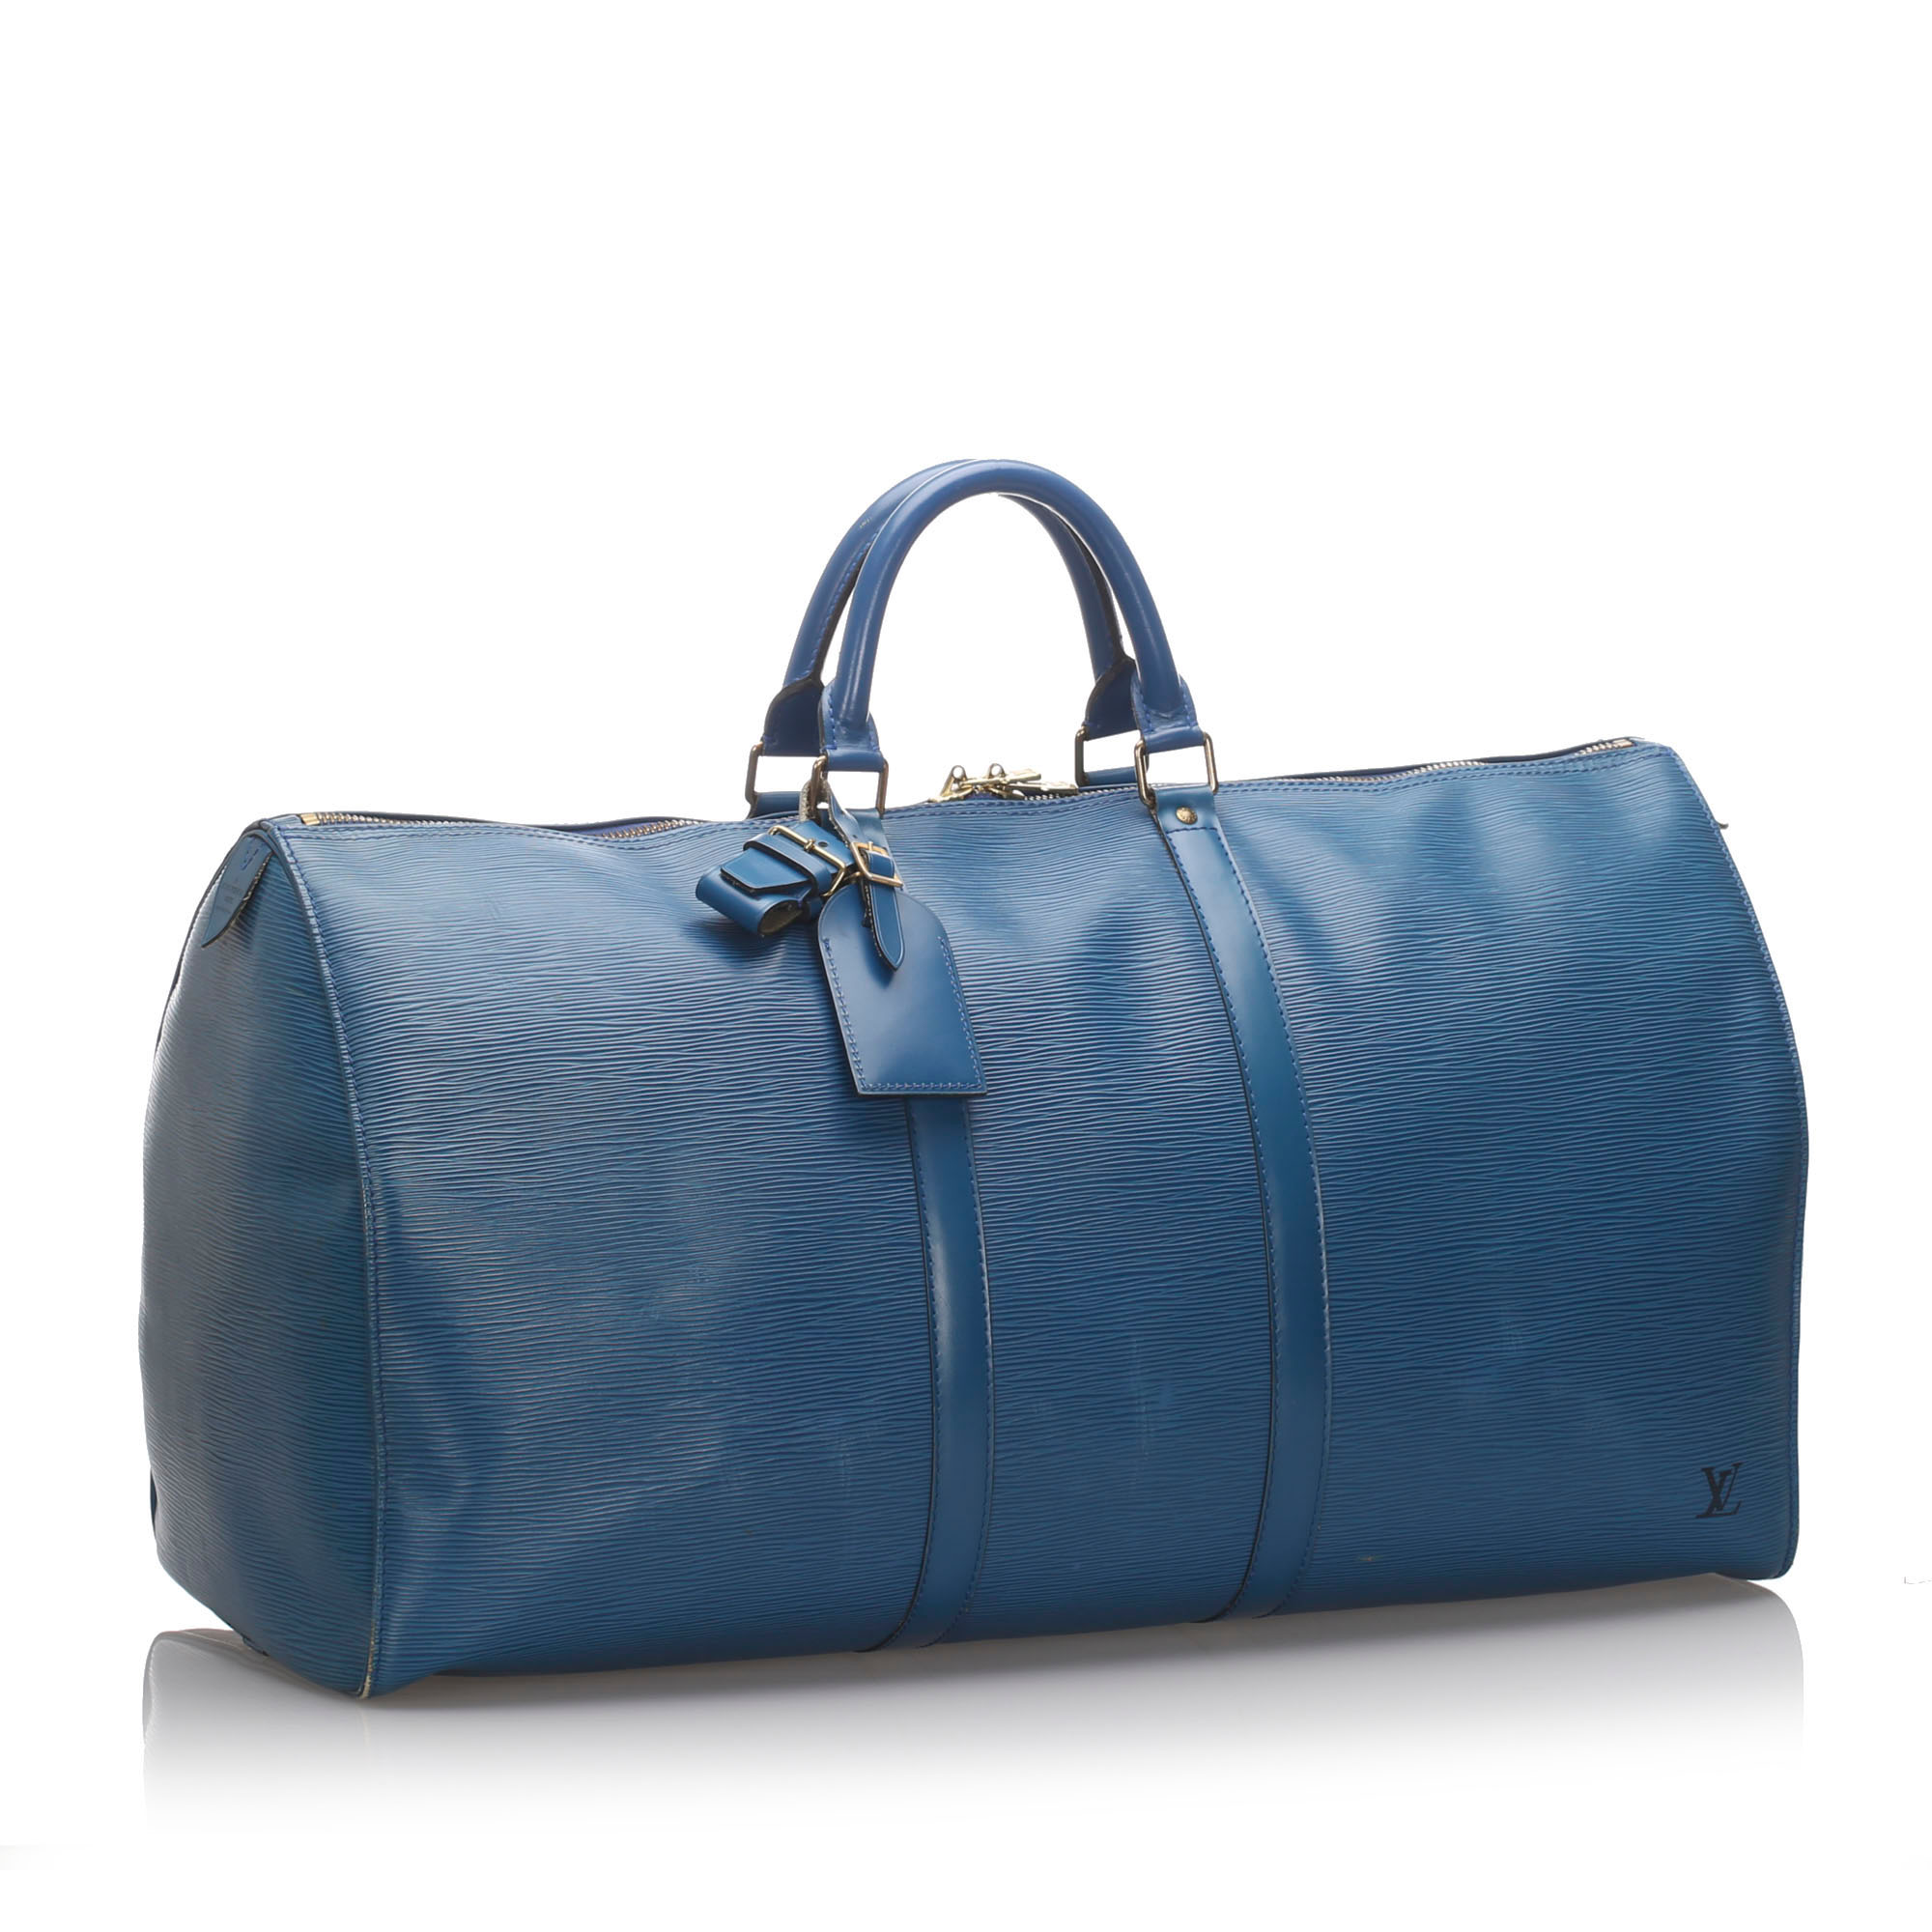 Pre-Loved Louis Vuitton Blue Epi Leather Keepall 50 France | eBay